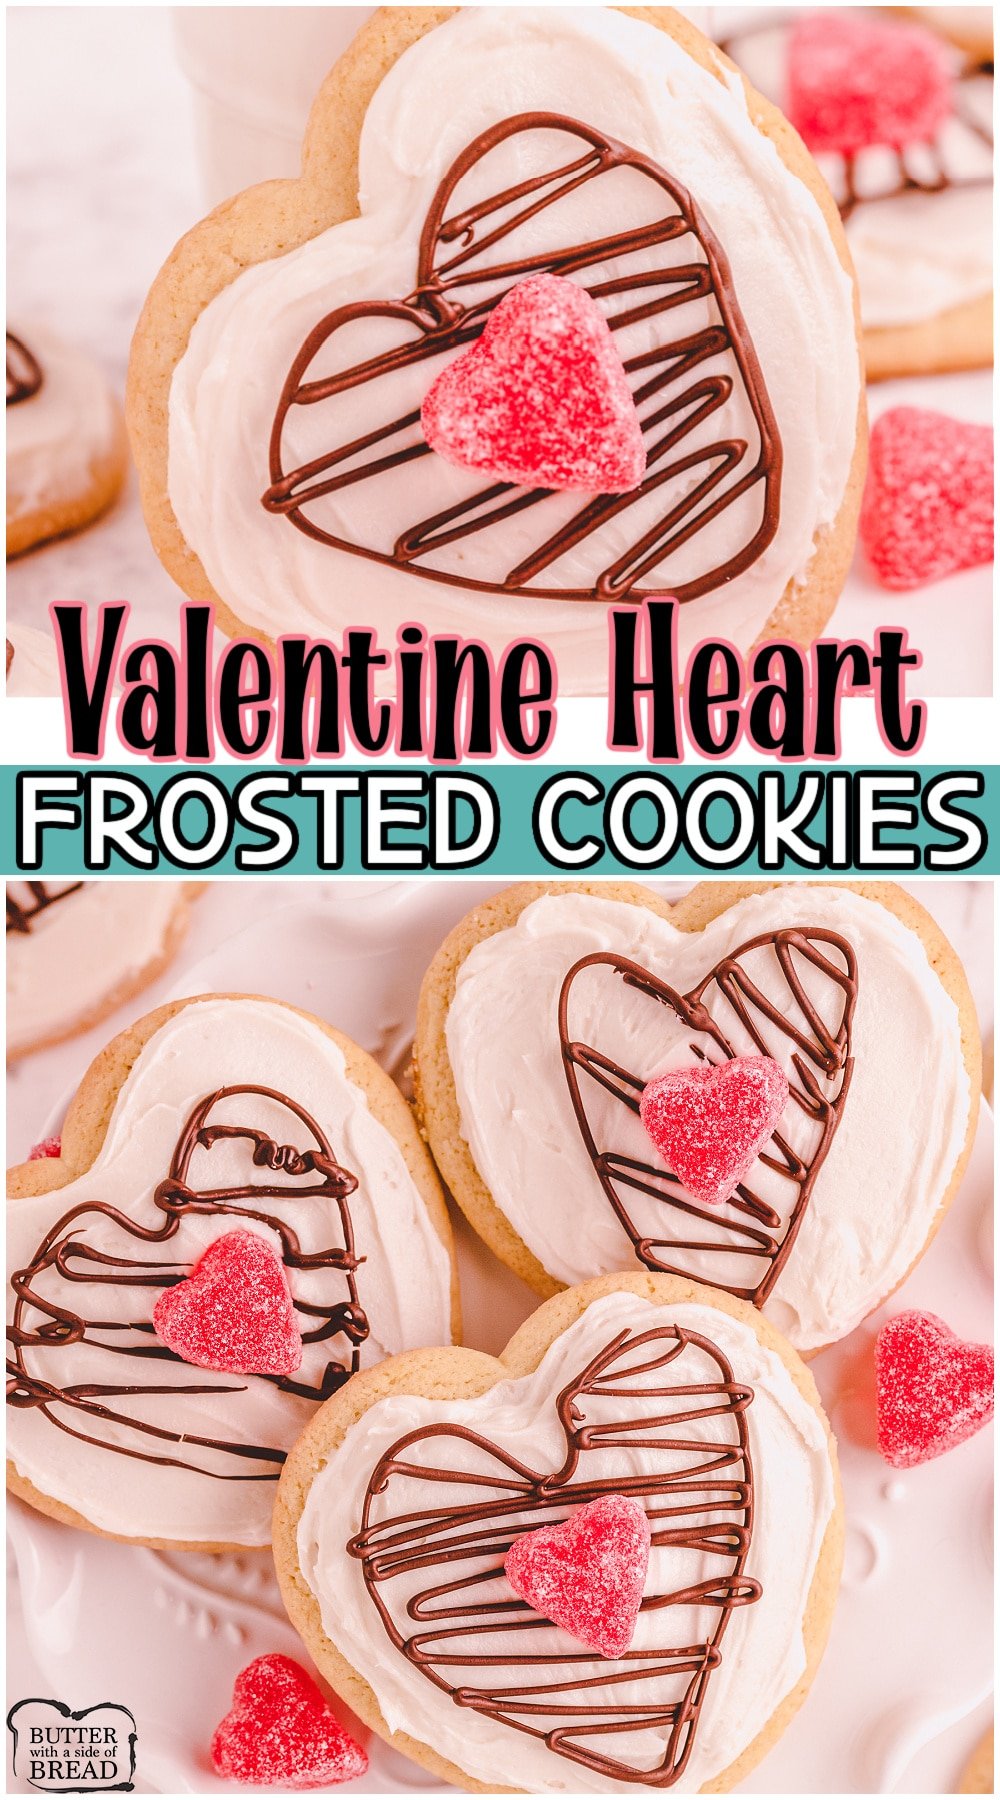 Chocolate Heart Valentine's Sugar Cookies are soft, sweet cookies with a festive chocolate heart! Great recipe for frosted sugar cookies that everyone loves!